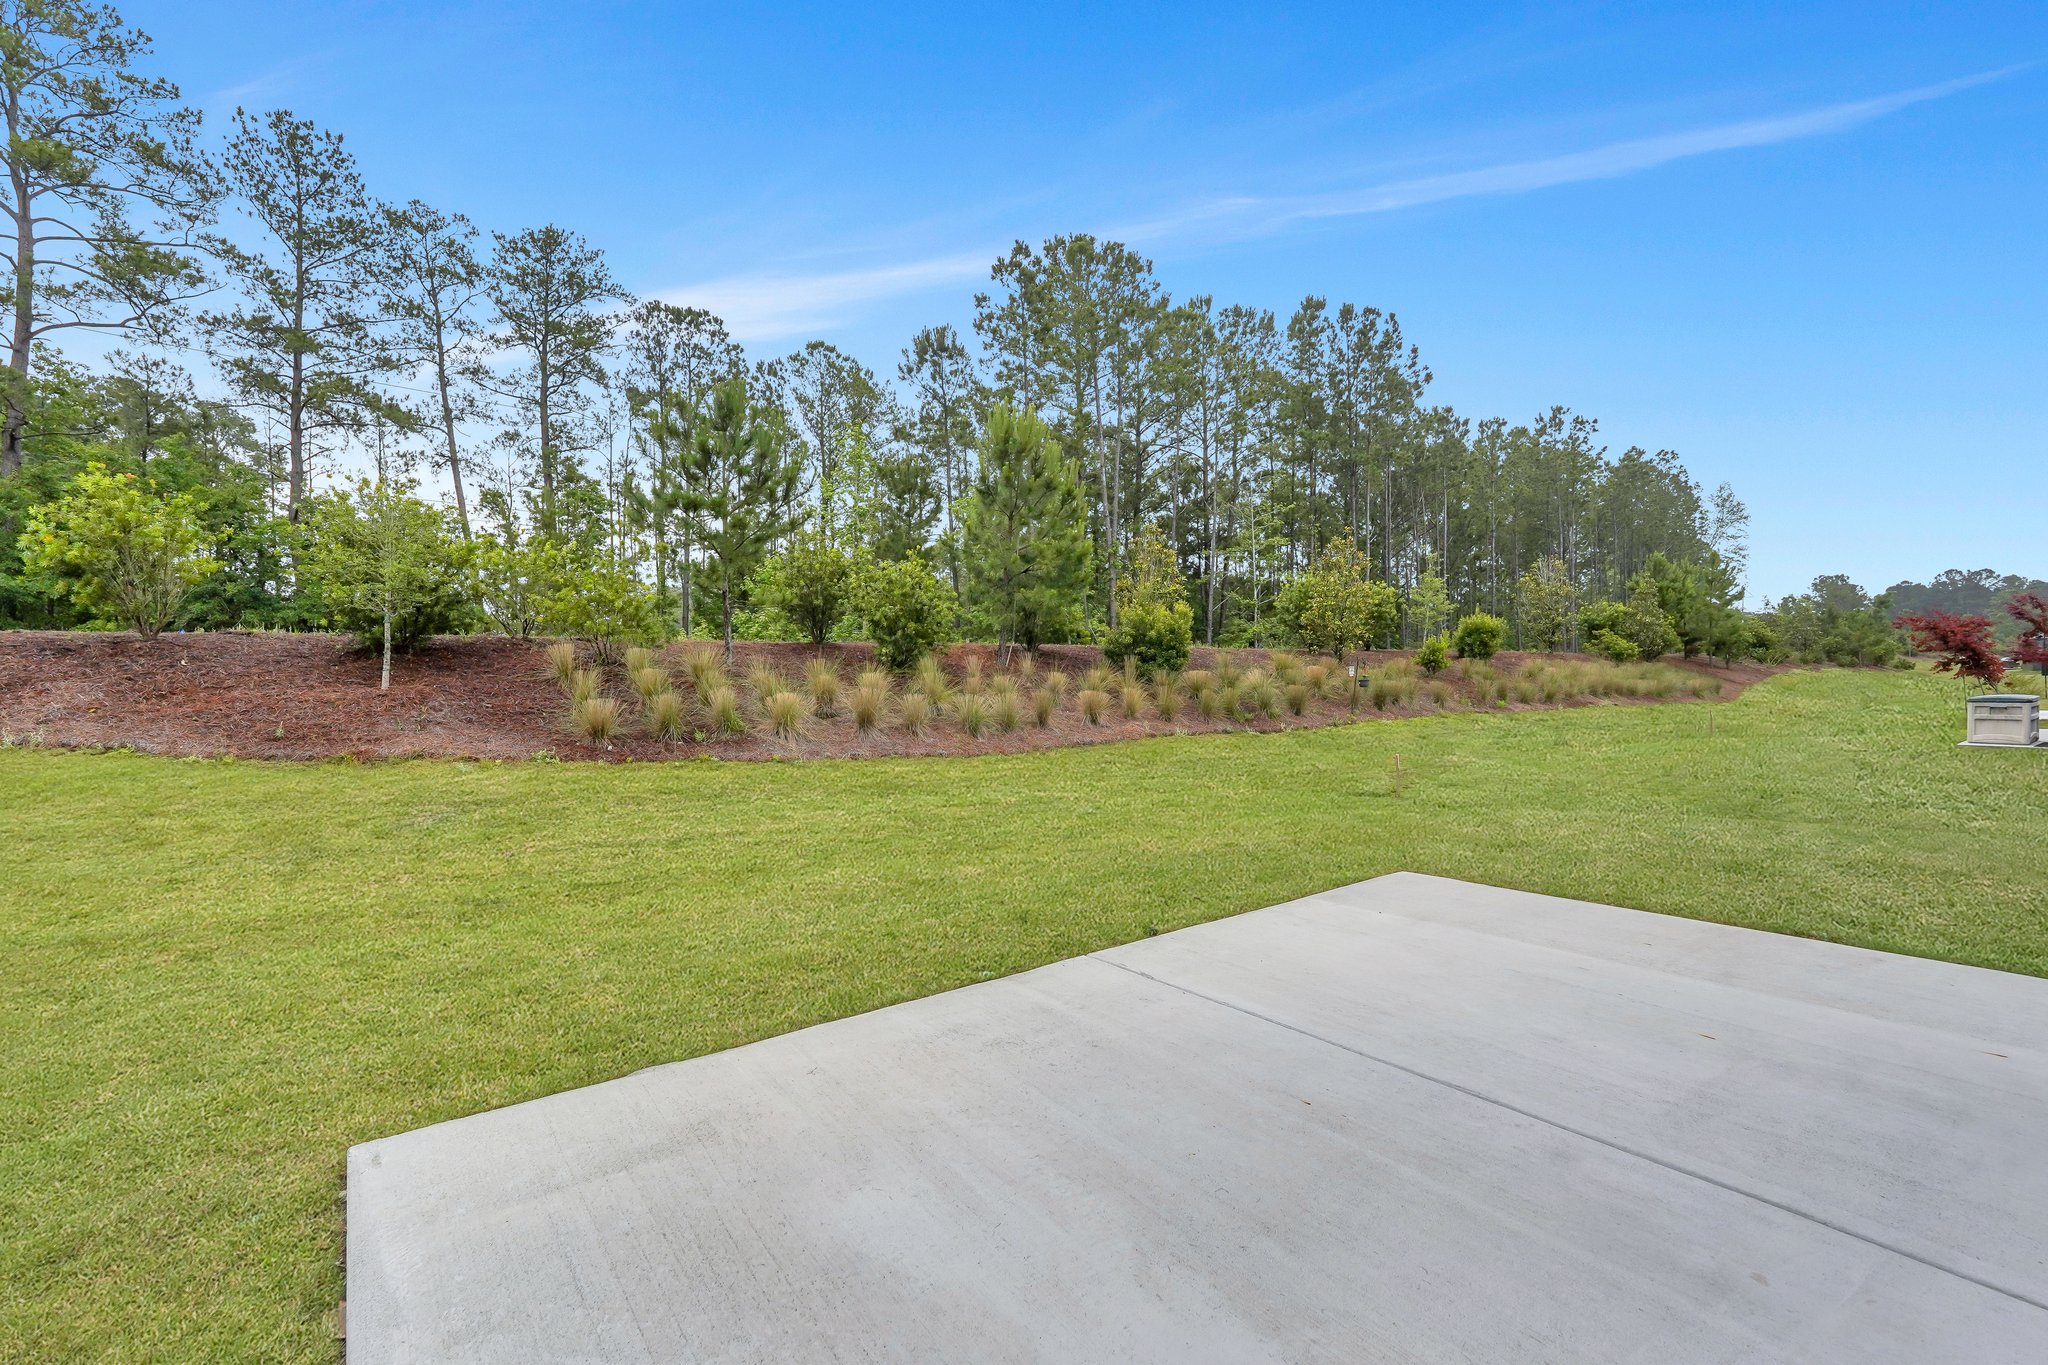 Enjoy Lowcountry Sunsets on this expanded uncovered patio